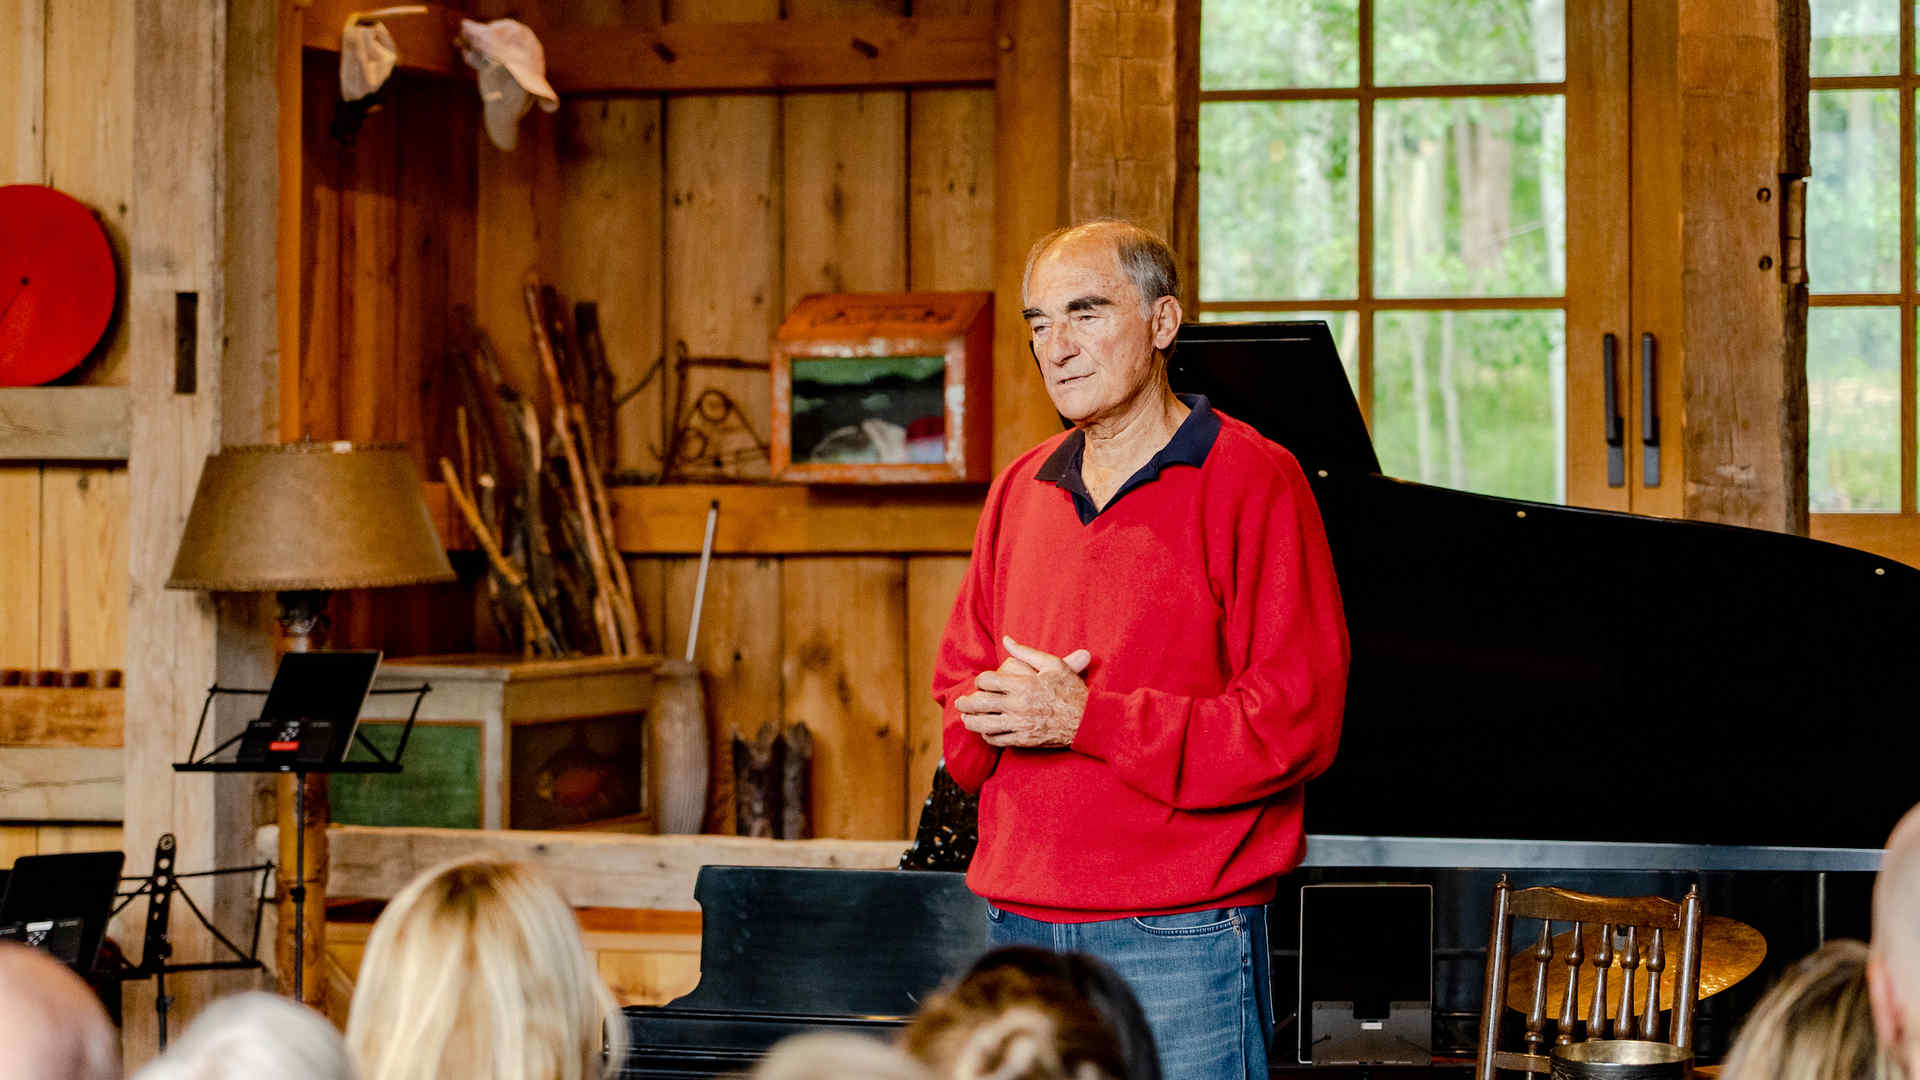 Vincent Mai, wearing a read sweater with blue polo shirt underneath and blue jeans, speaks to an audience. Behind him is a grand piano with lid open. The setting appears to be wood-paneled farmhouse or country house.